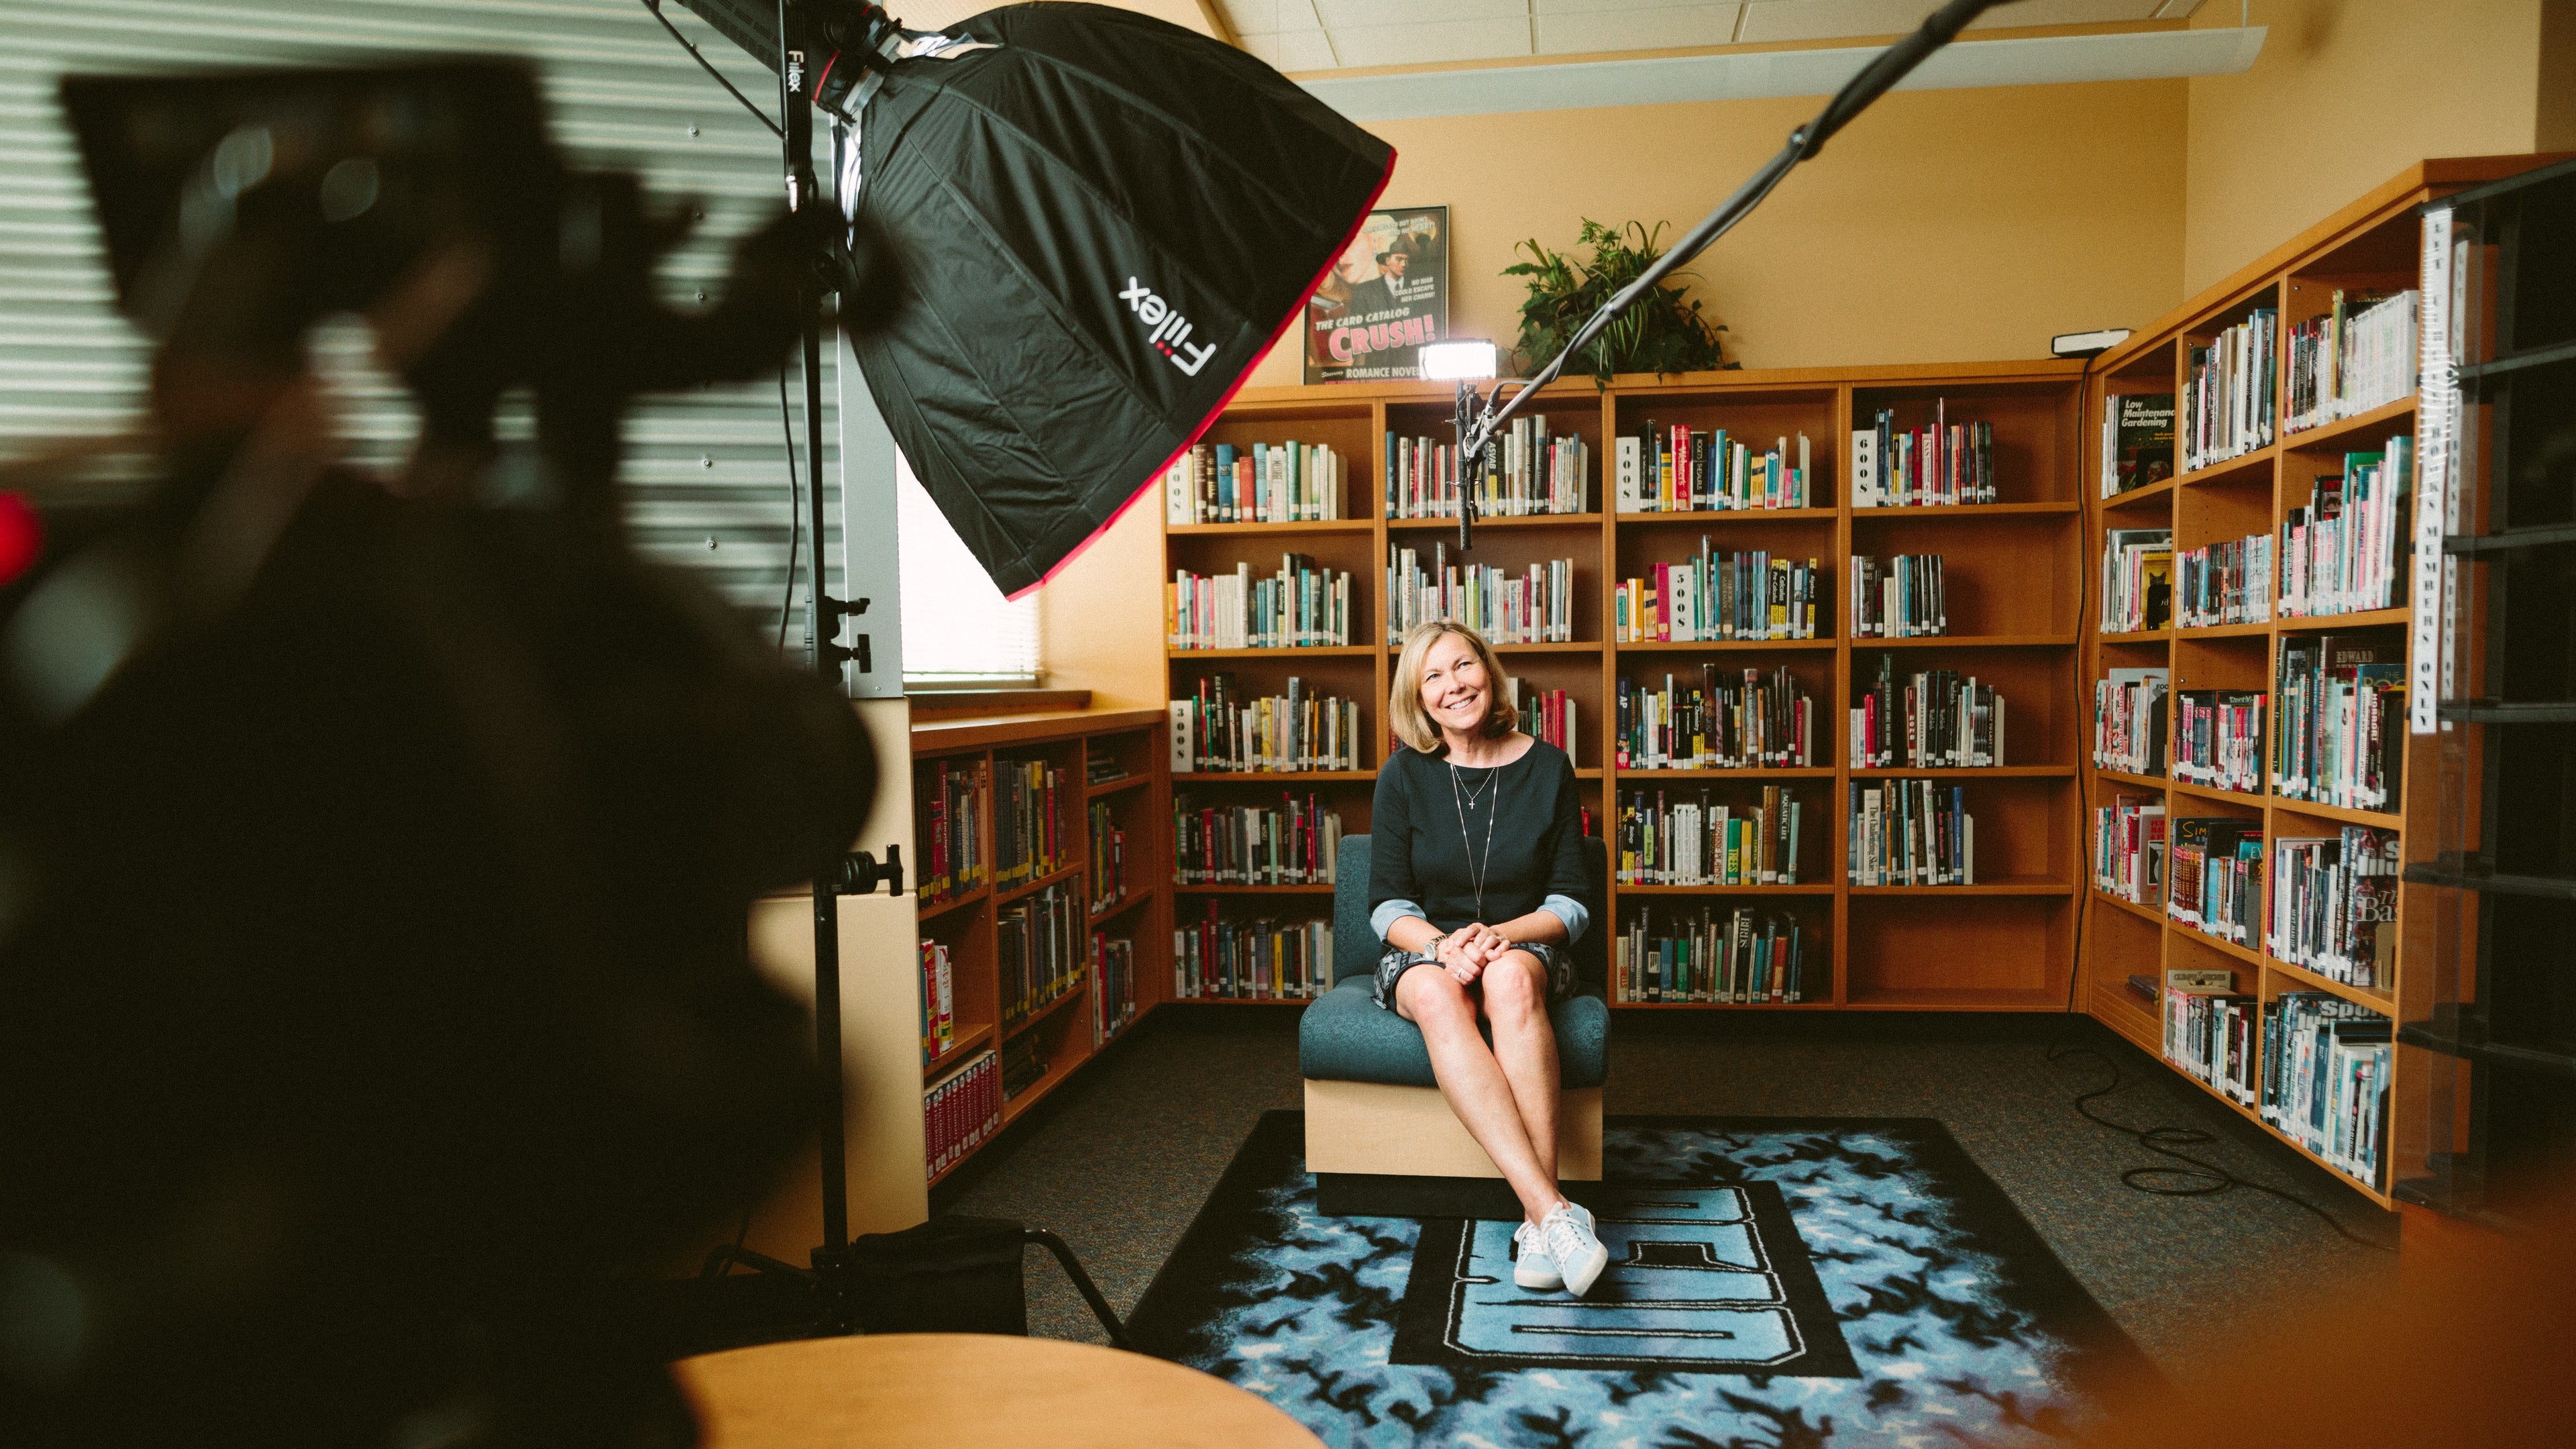 A woman being filmed in front of a wall of books smiling at the camera. Lighting and camera visible in frame on left of the image.